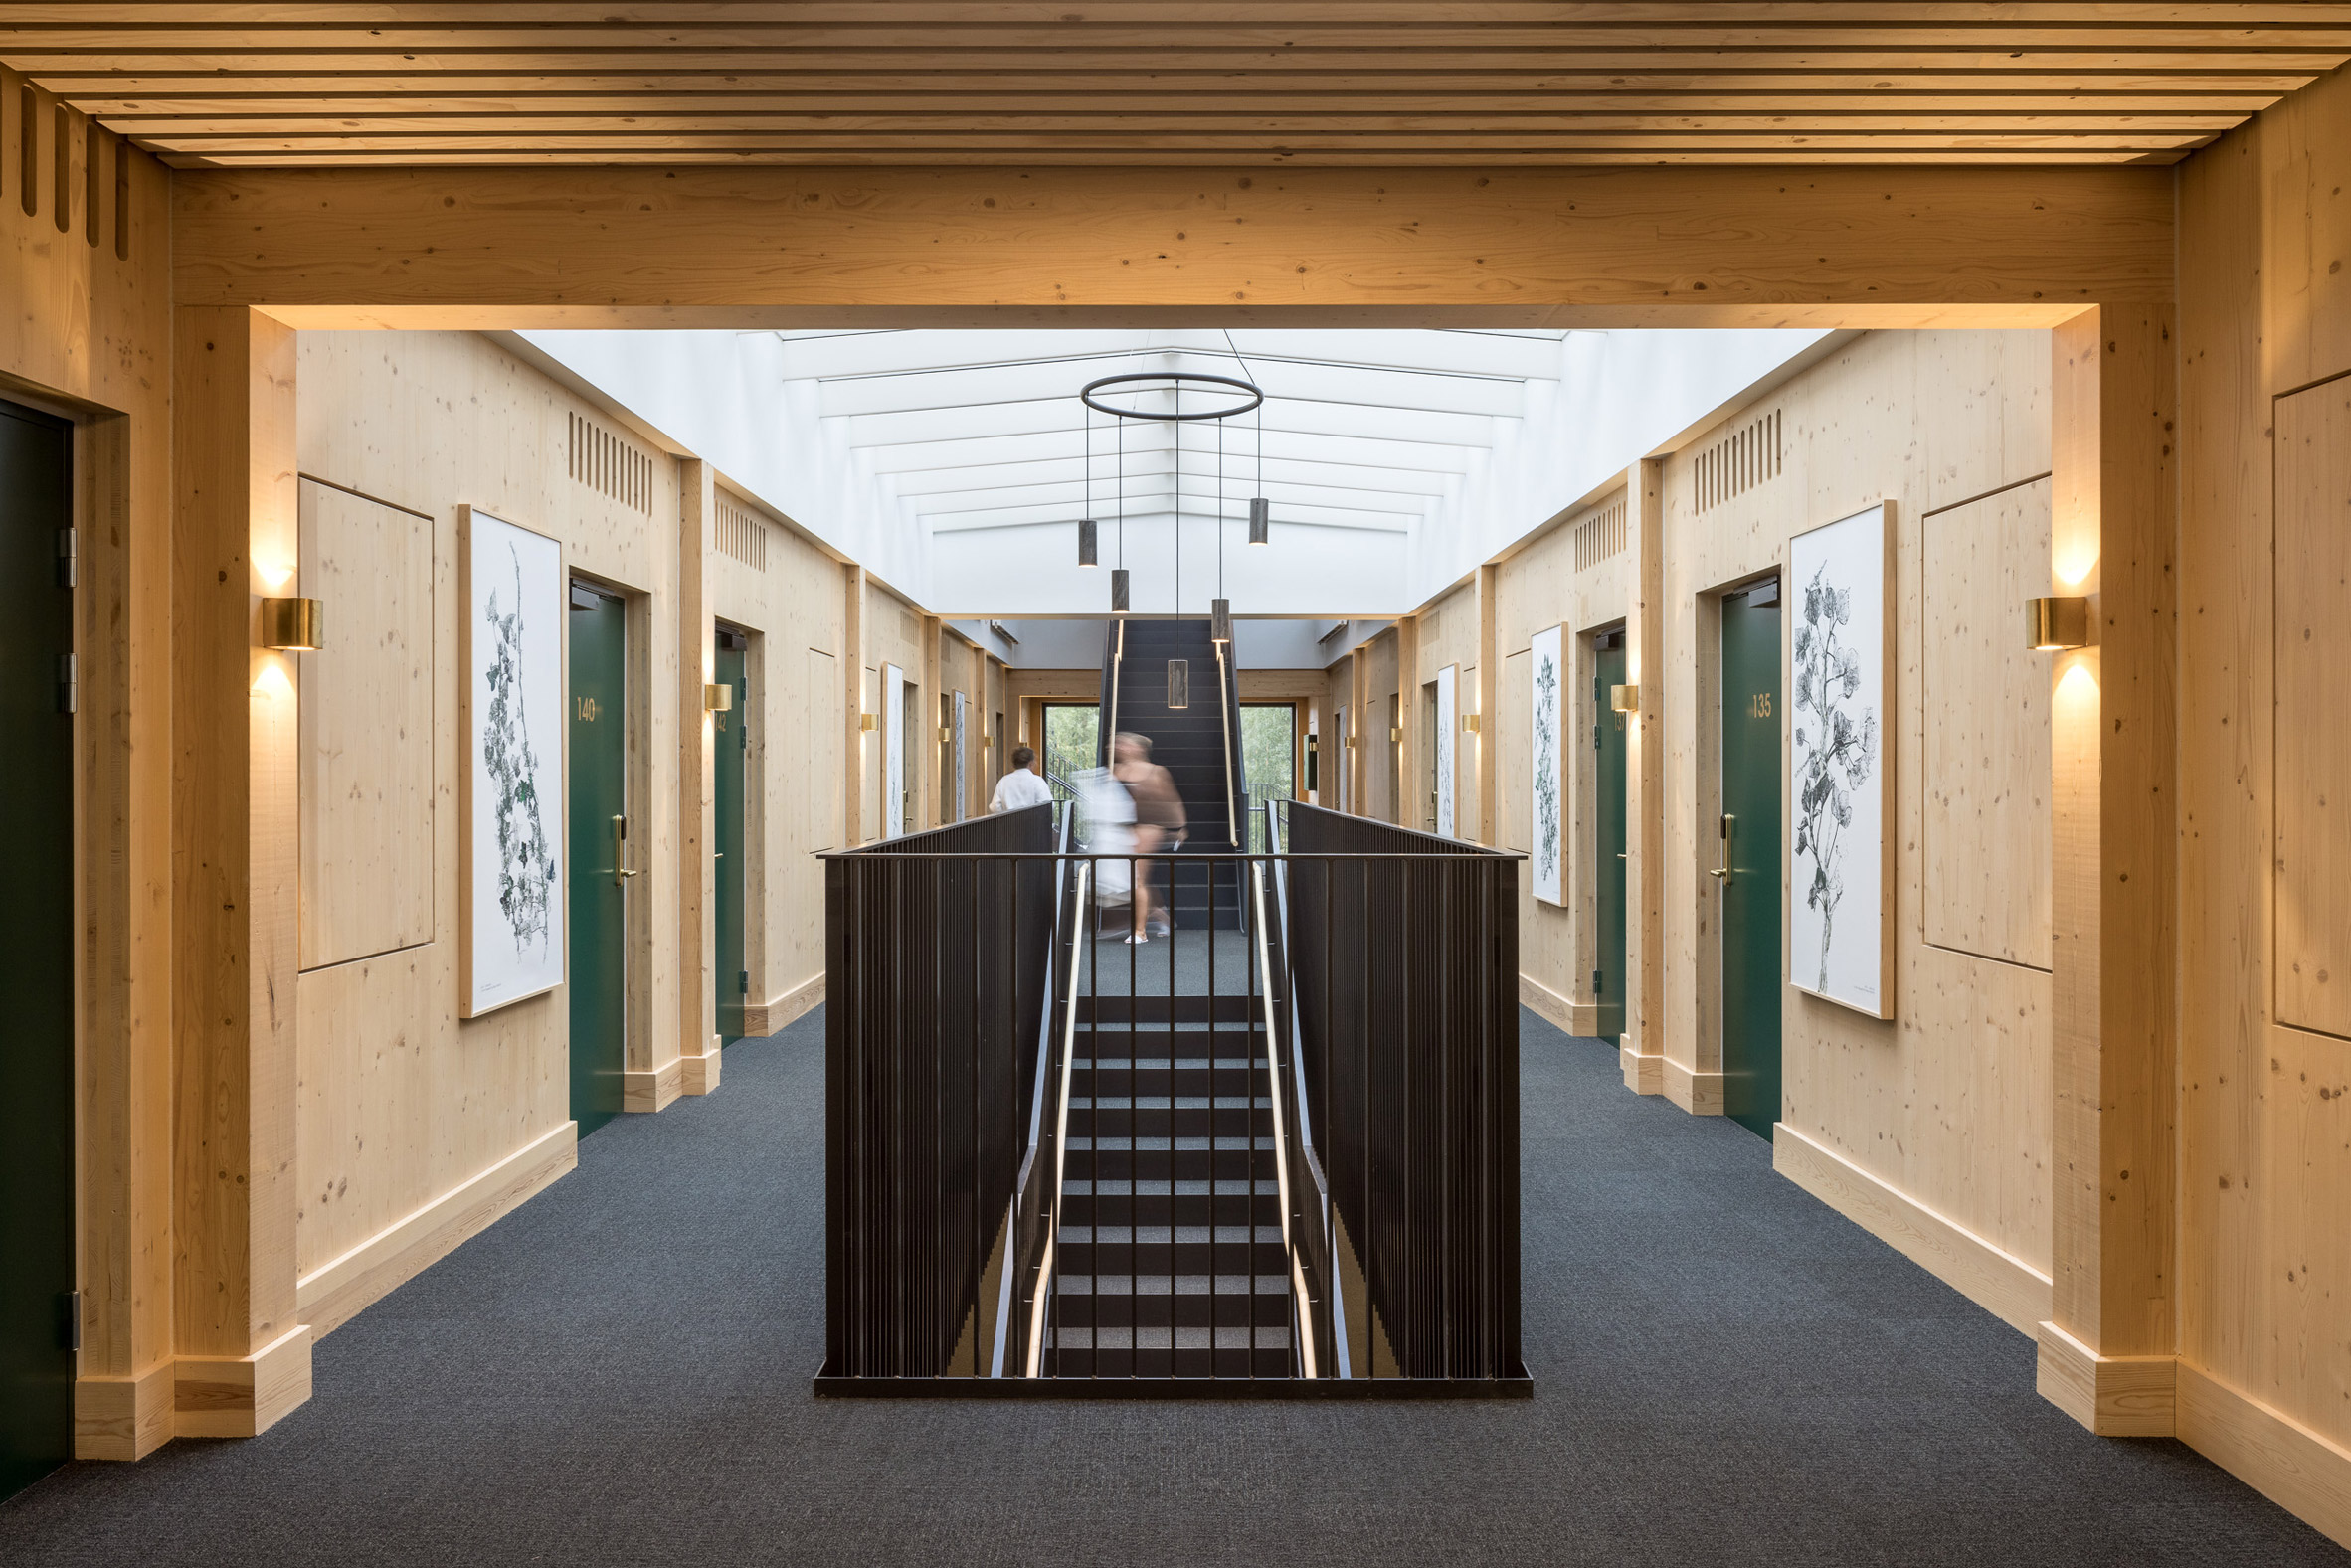 Staircase and atrium of 3XN-designed hotel in Denmark